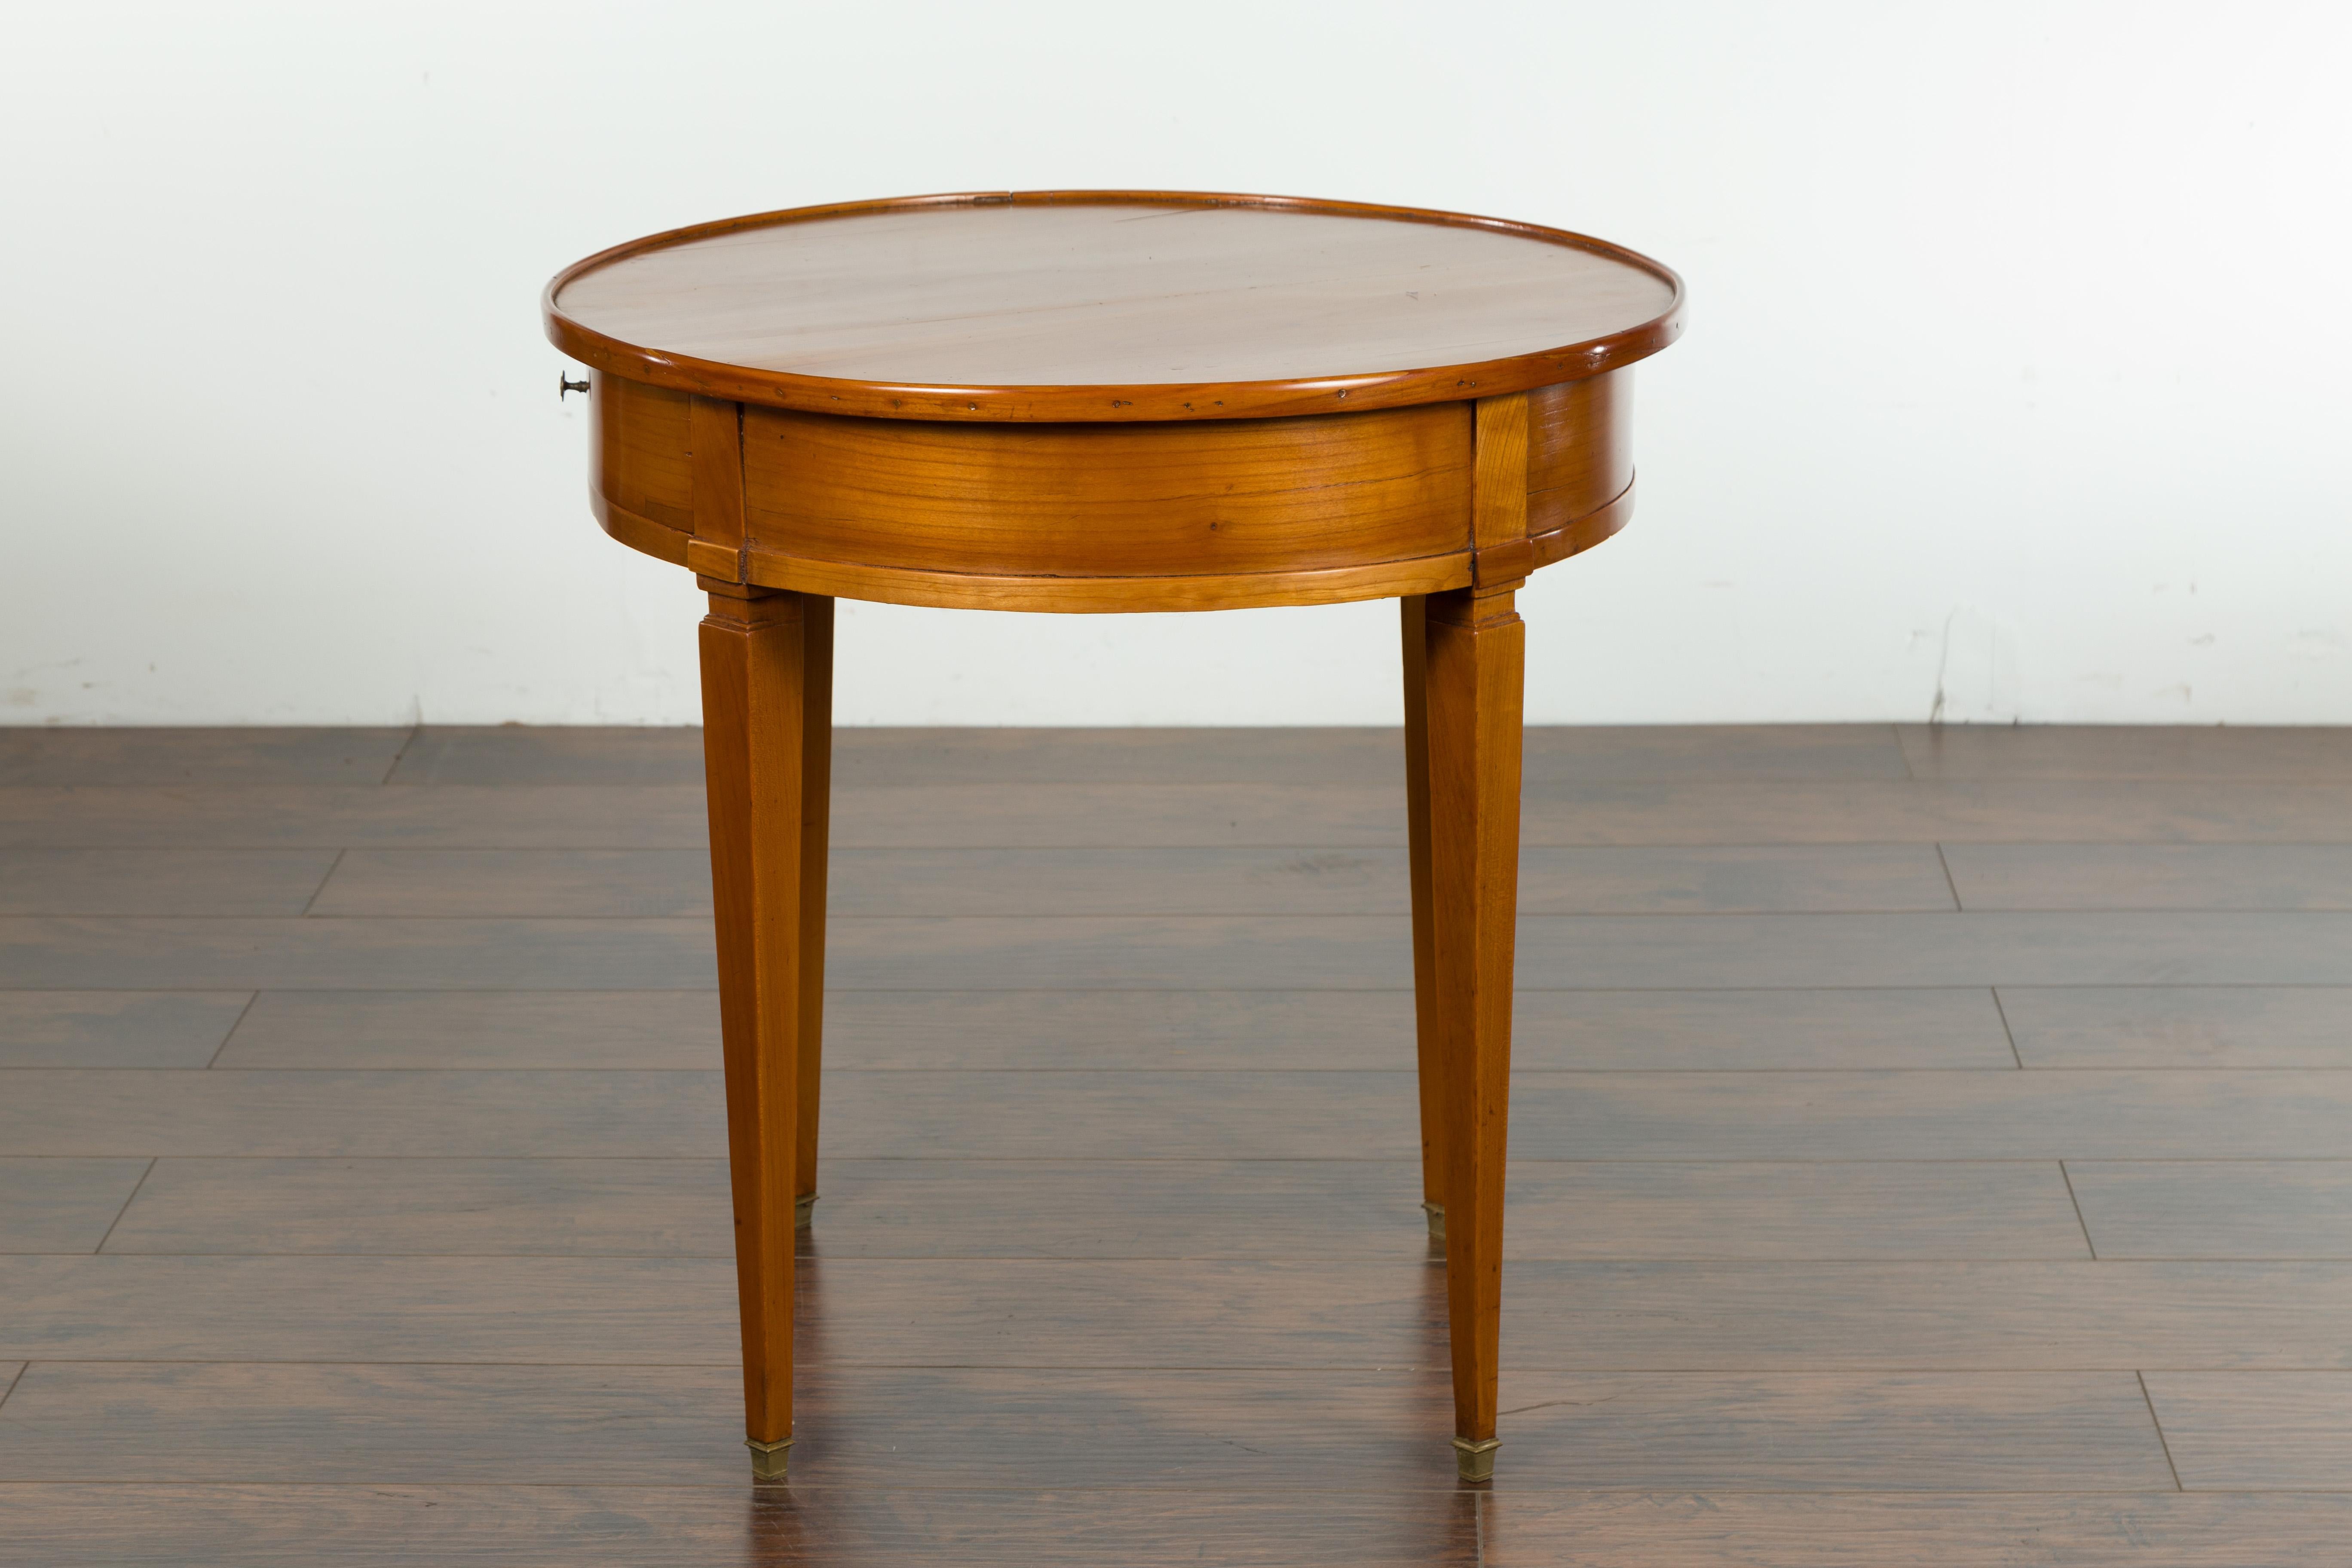 French Napoléon III 1850s Walnut Side Table with Single Drawer and Tapered Legs For Sale 6